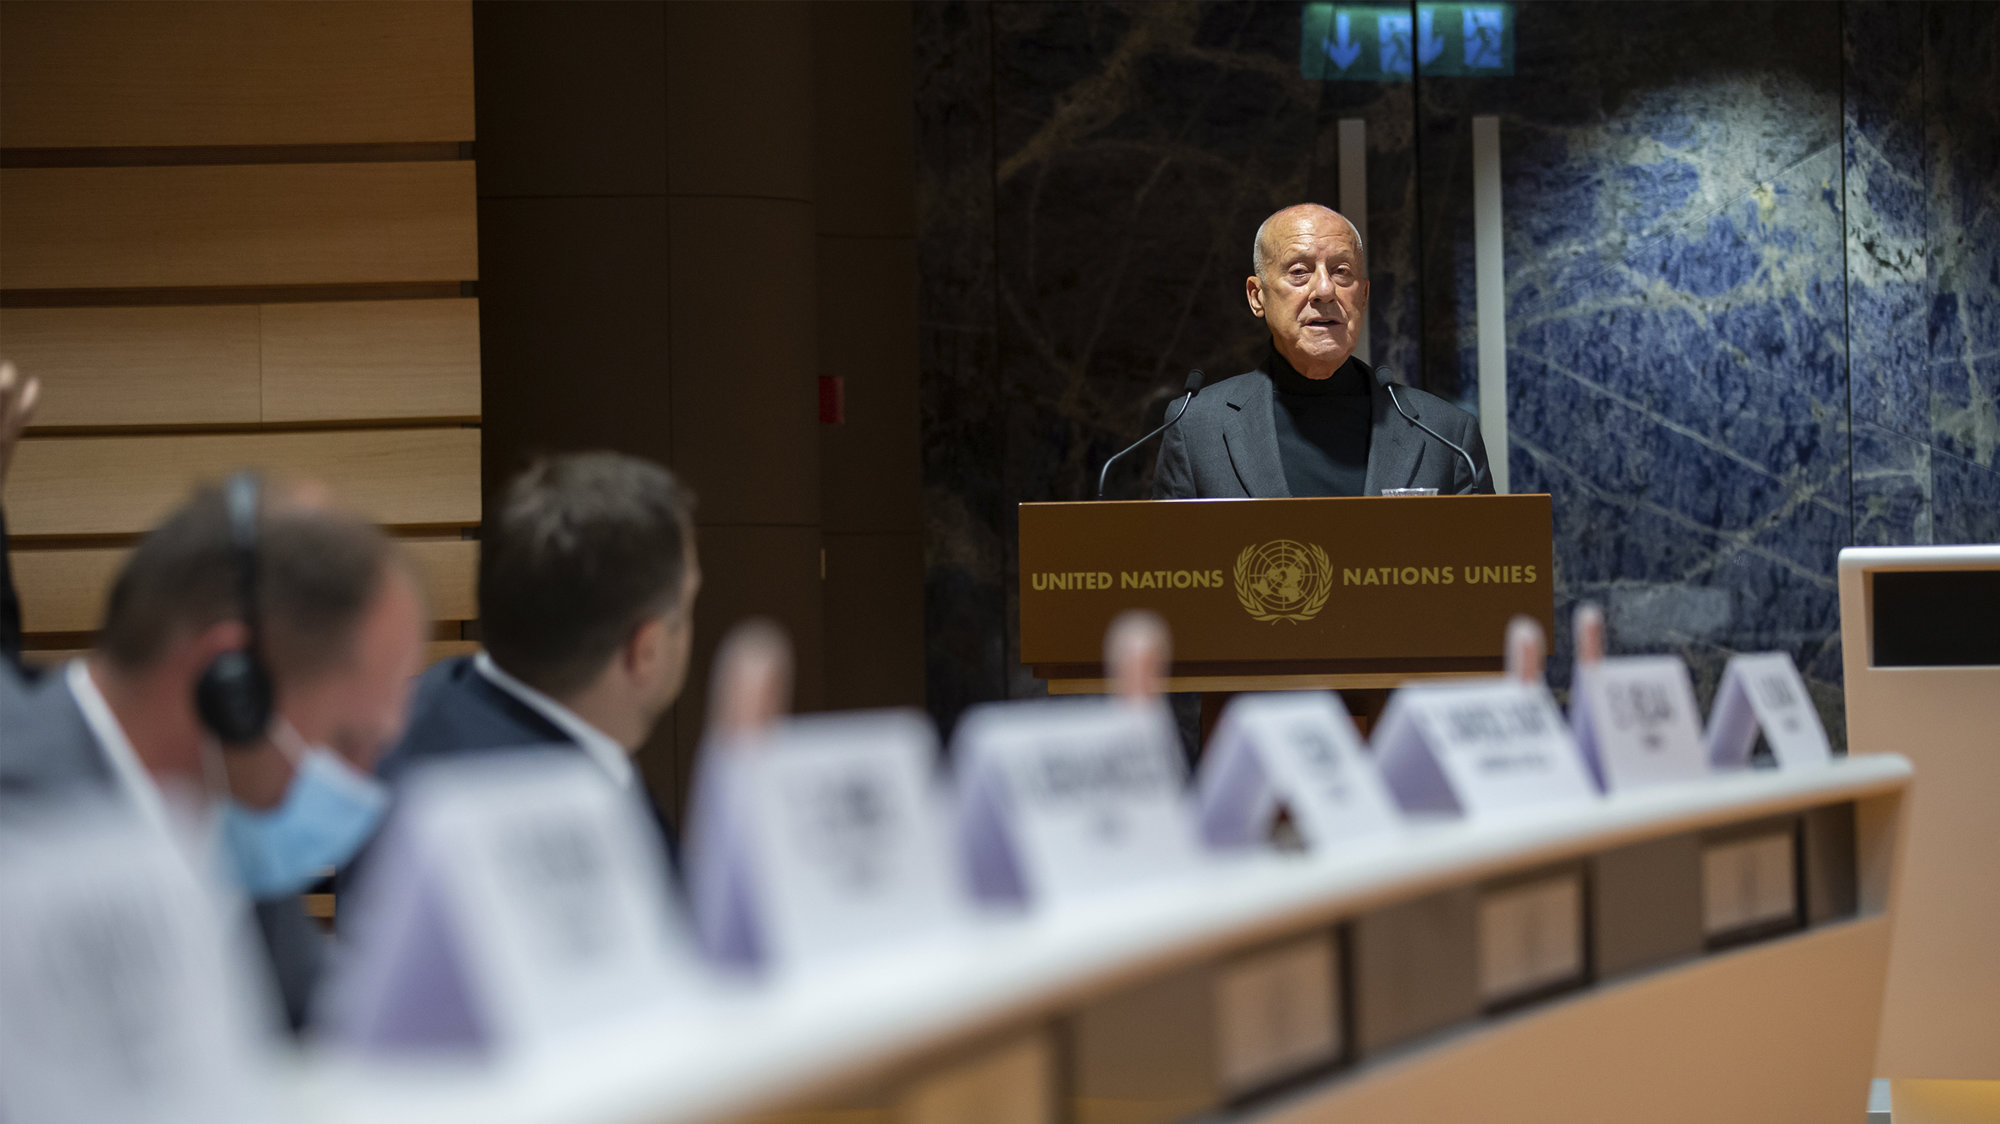 Norman Foster Addresses The First United Nations Forum Of Mayors In Geneva